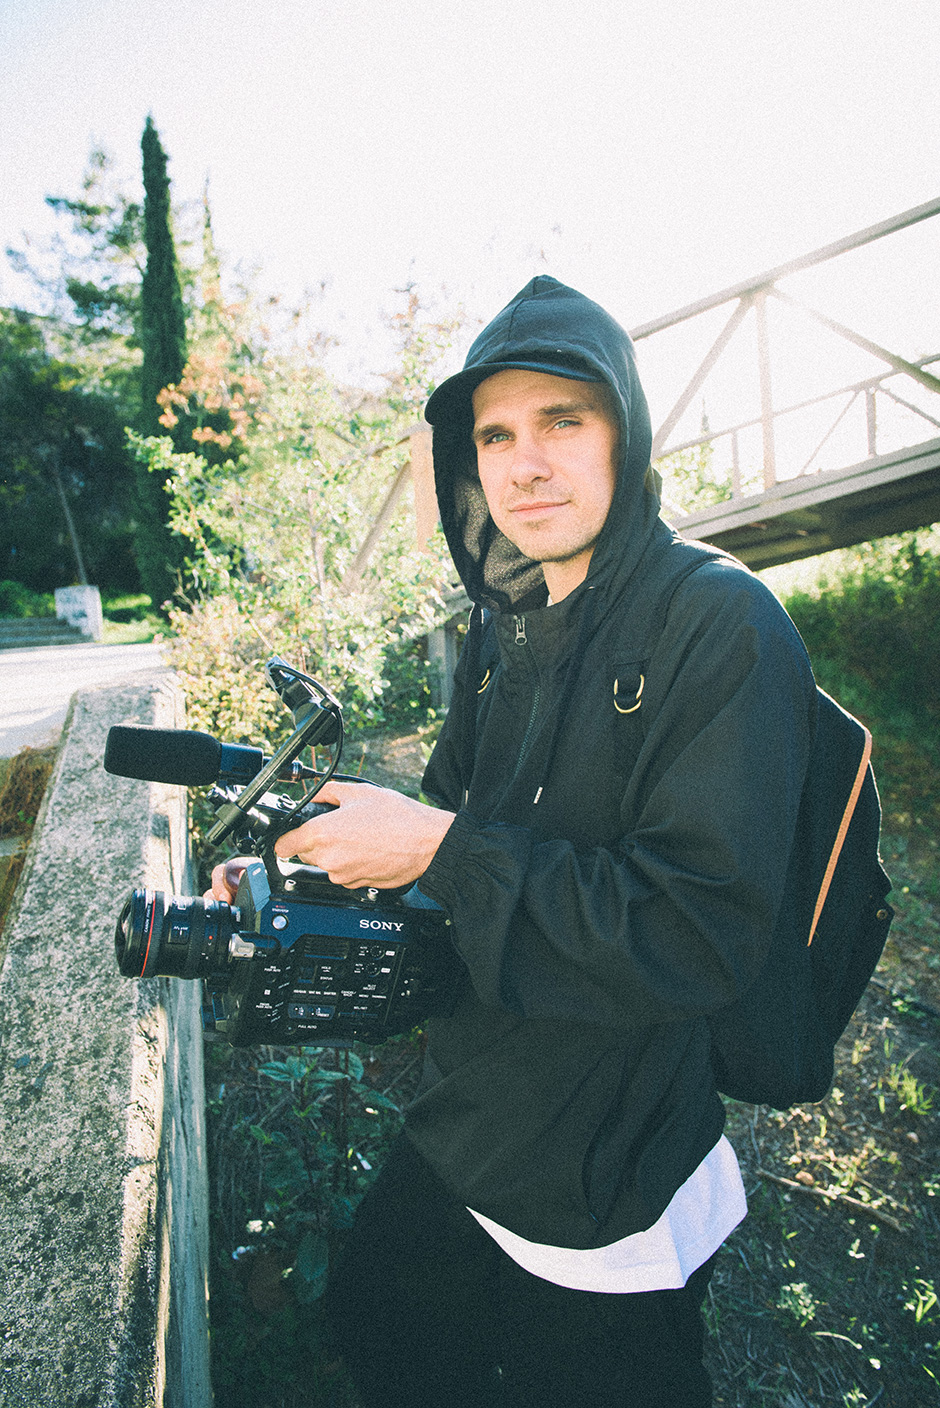 Wade Desarmo on the other side of the lens. Photo by Oliver Barton